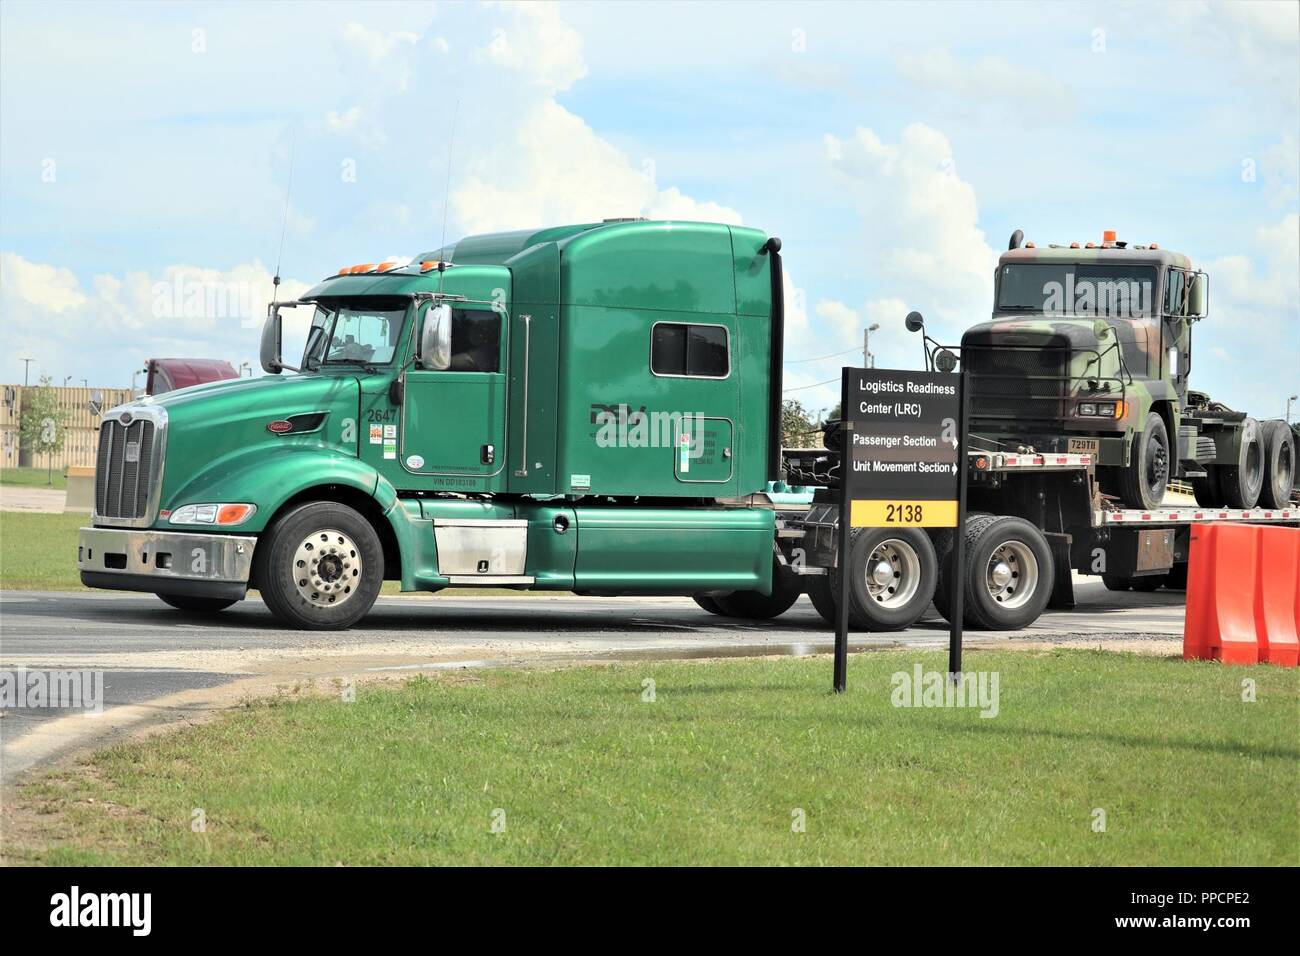 A contracted driver prepares to move a military truck on a semi tractor- trailer Sept. 4, 2018, at Fort McCoy, Wis. The truck was used during the  86th Training Division's Combat Support Training